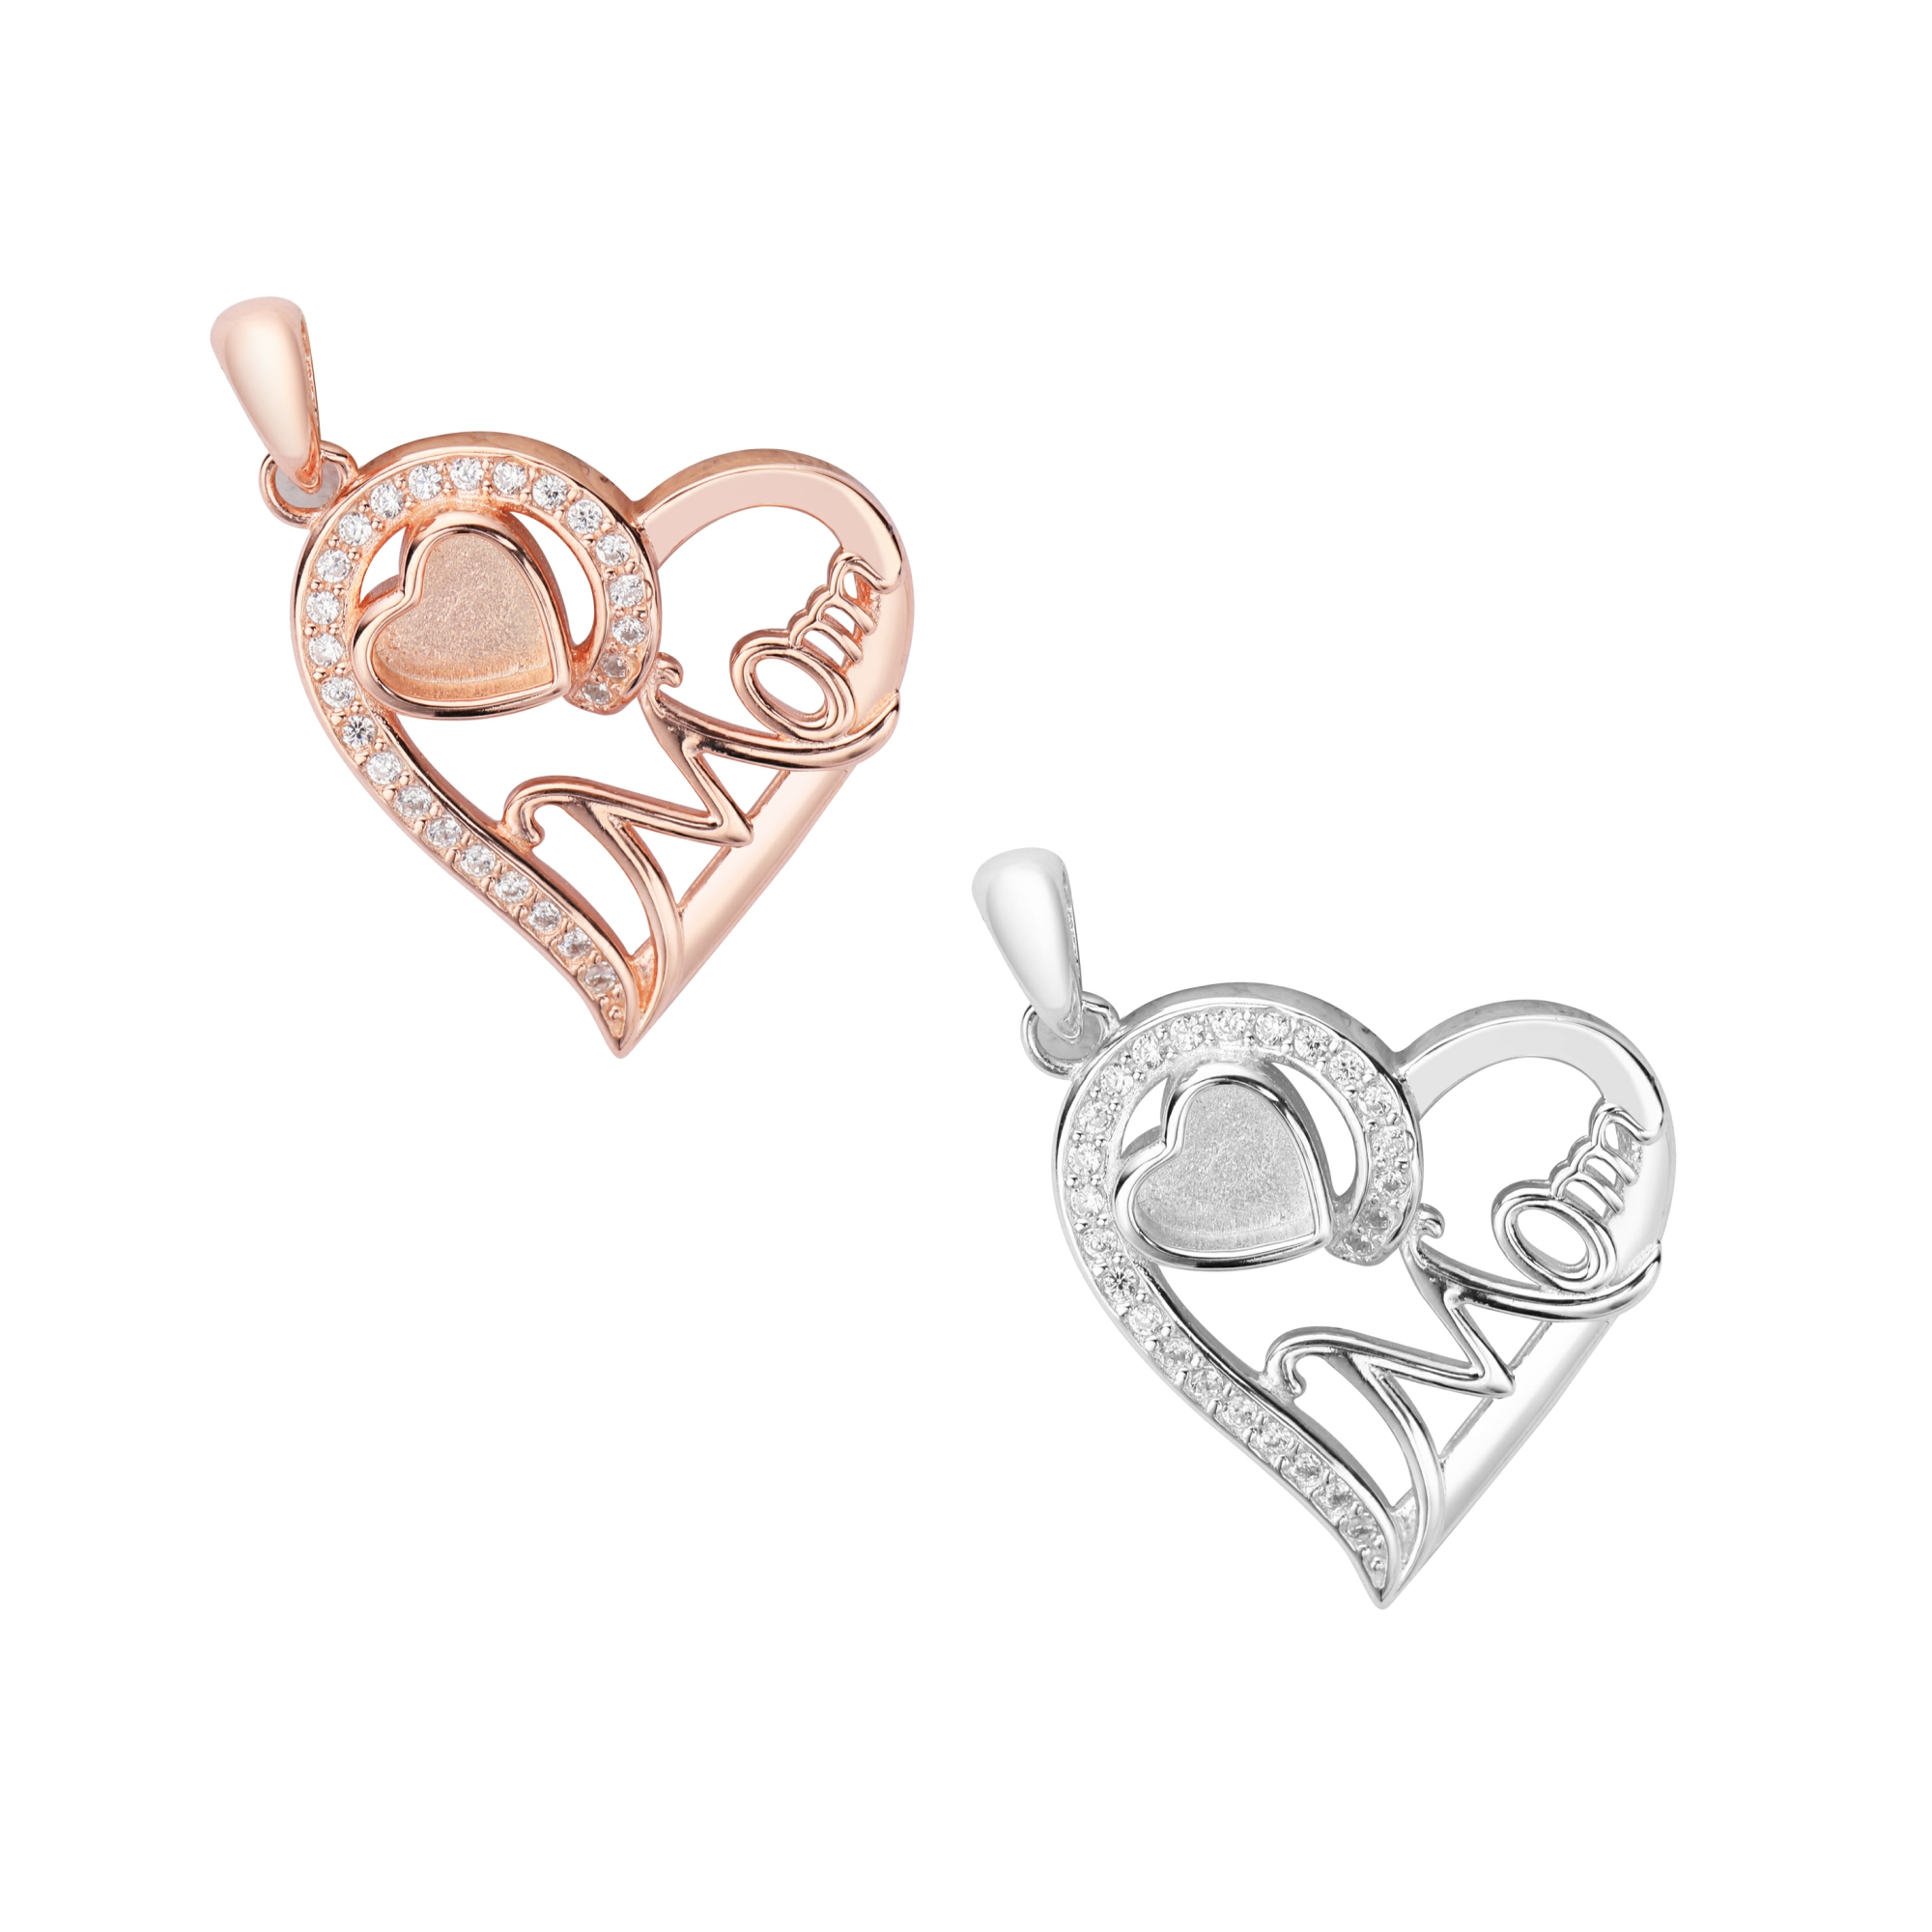 5MM Bezel Keepsake Breast Milk Resin Heart Pendant Settings,Solid 925 Sterling Silver Rose Gold Plated Pendant,Mom Pendant,DIY Memory Jewelry Supplies Overall Size 18MM 1431223 - Click Image to Close